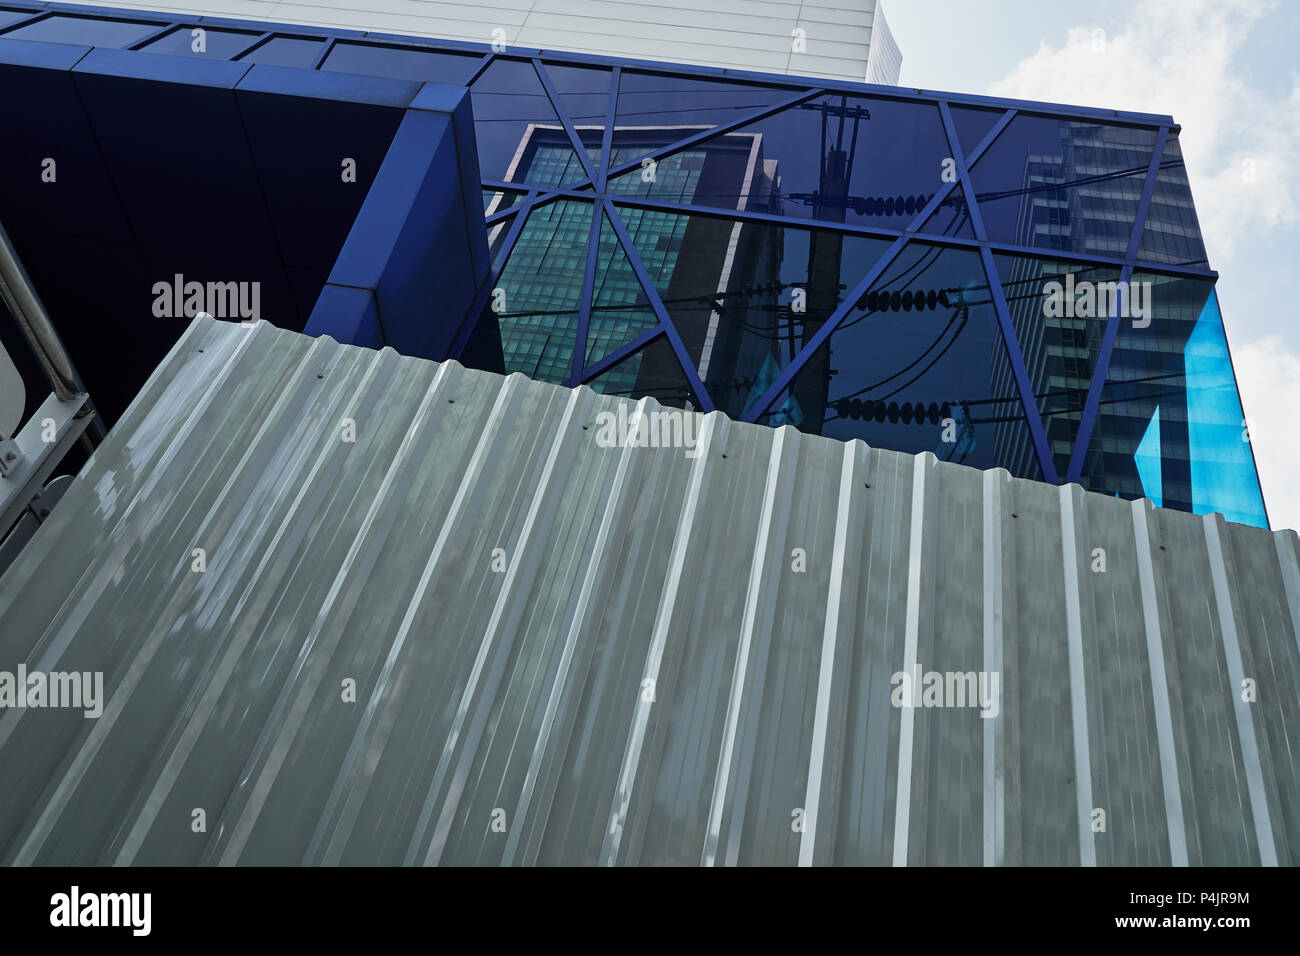 Abstract views in architecture Stock Photo